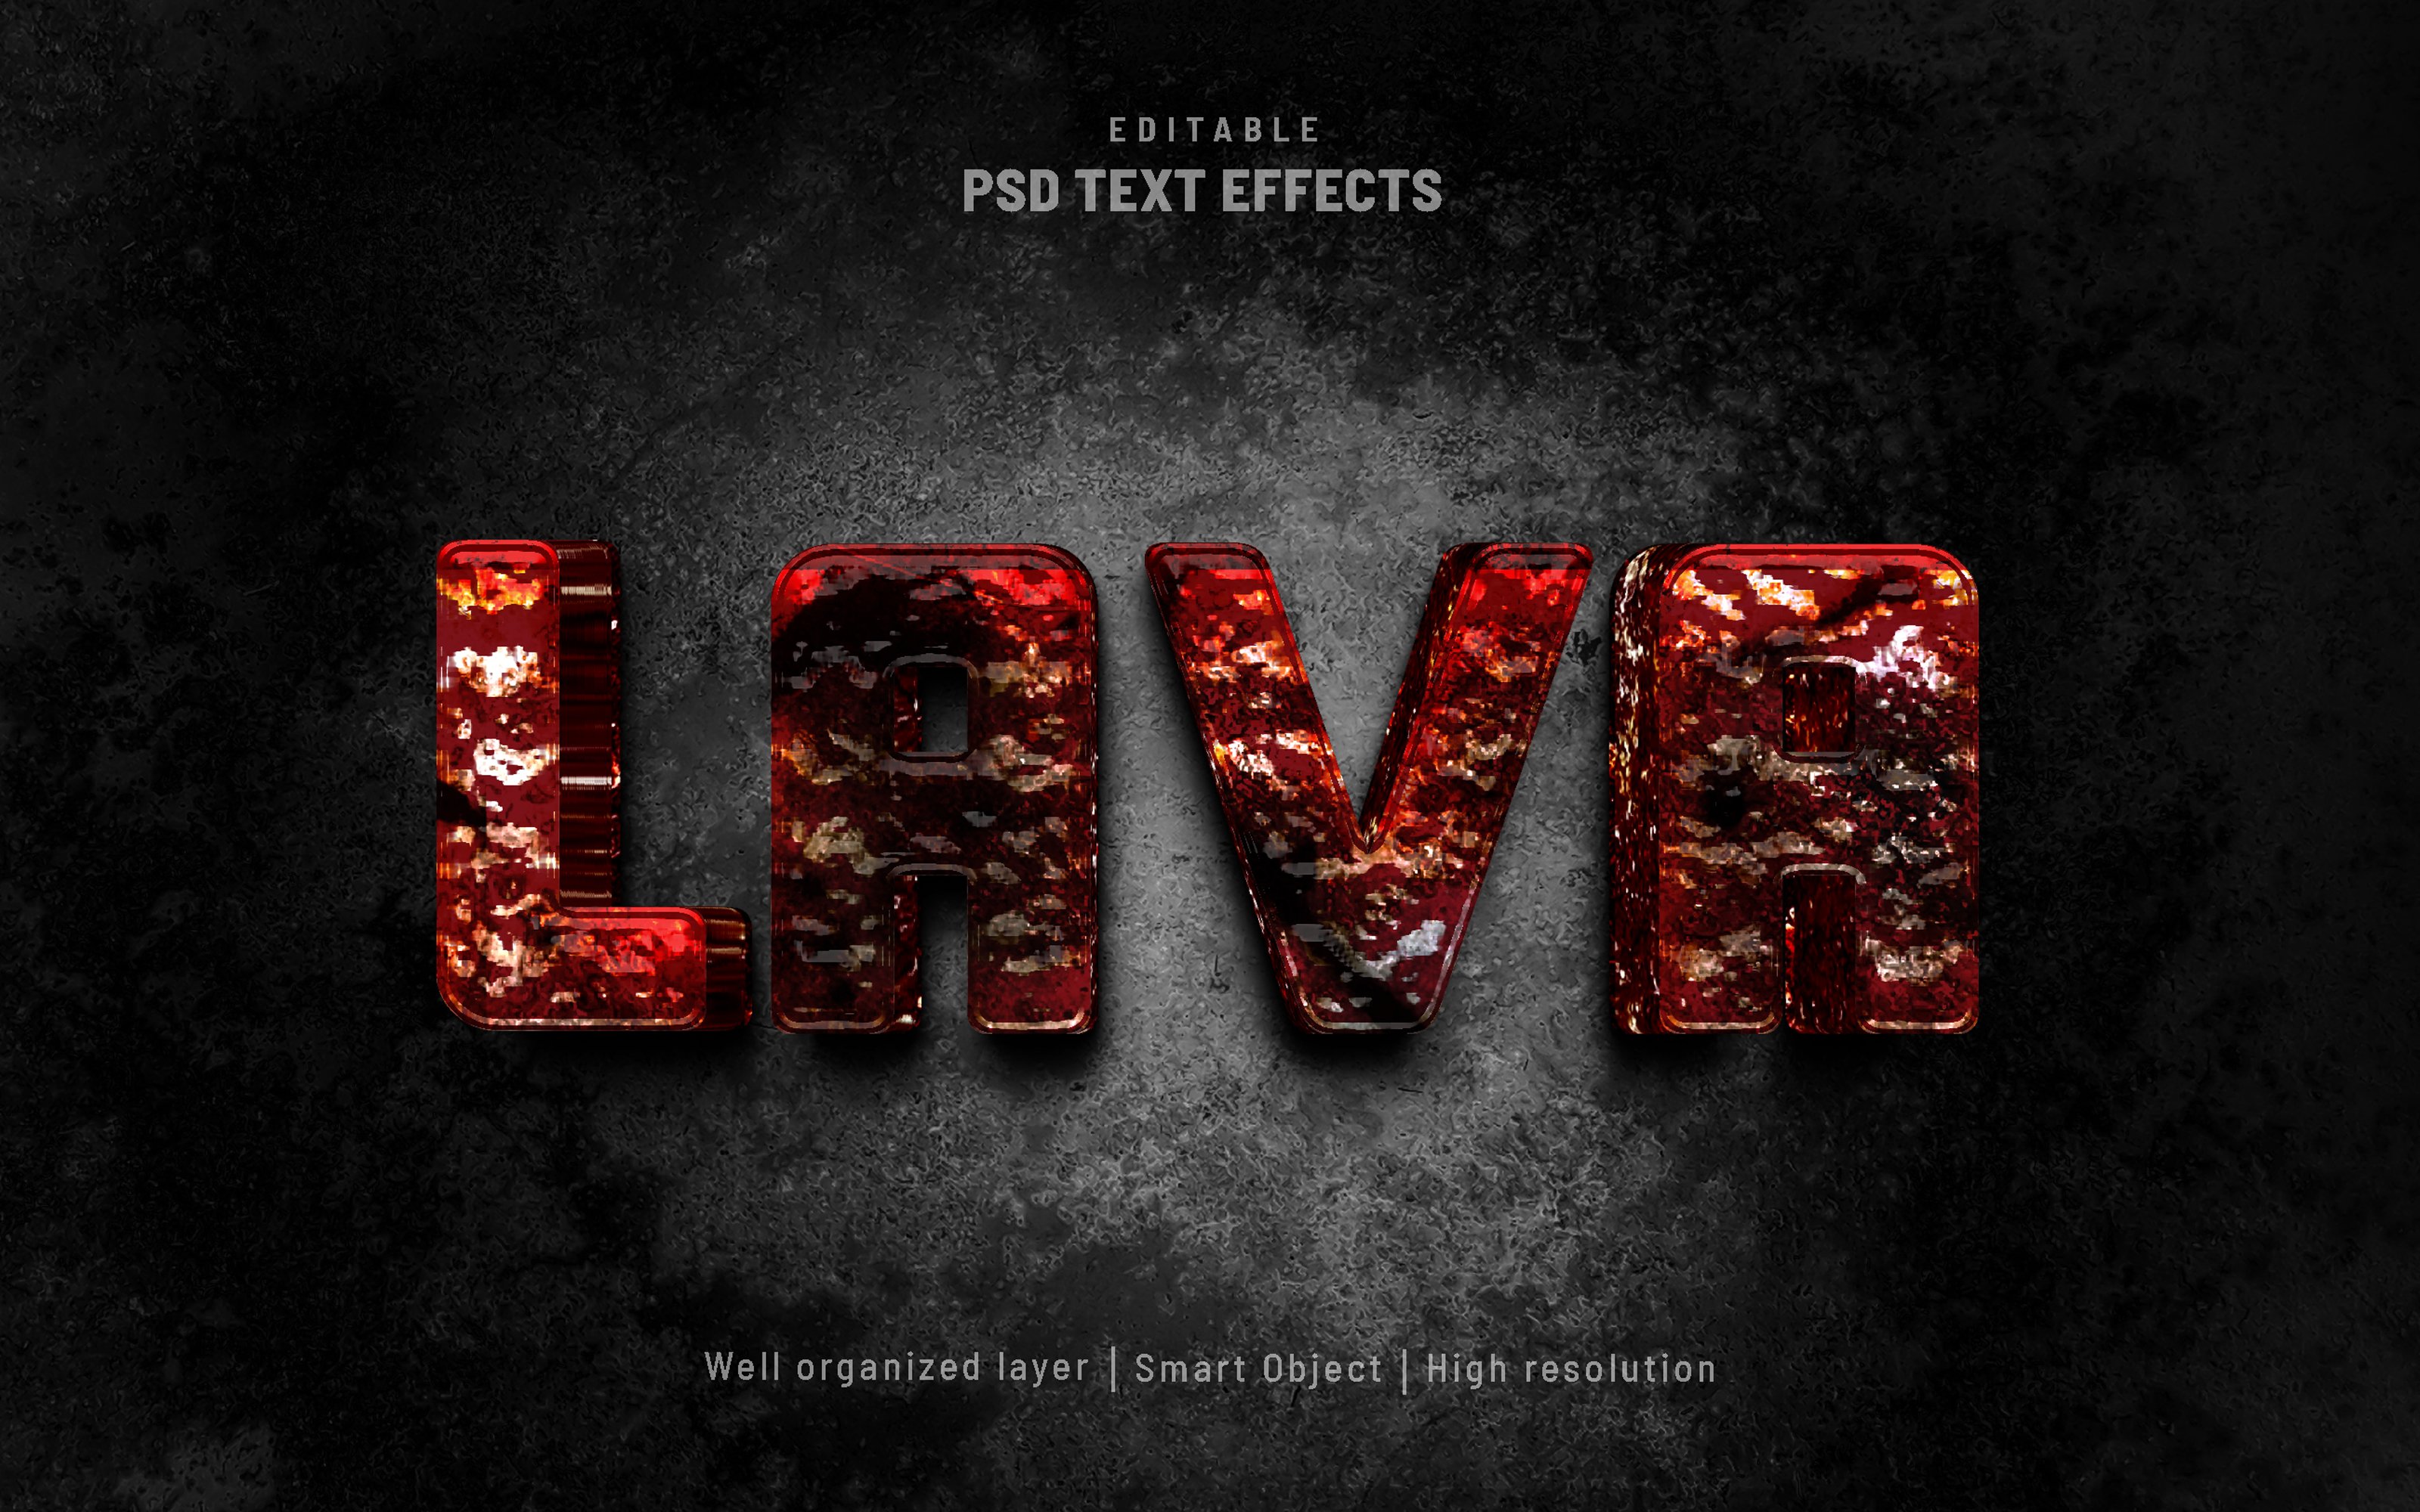 Lava editable text action PSDpreview image.